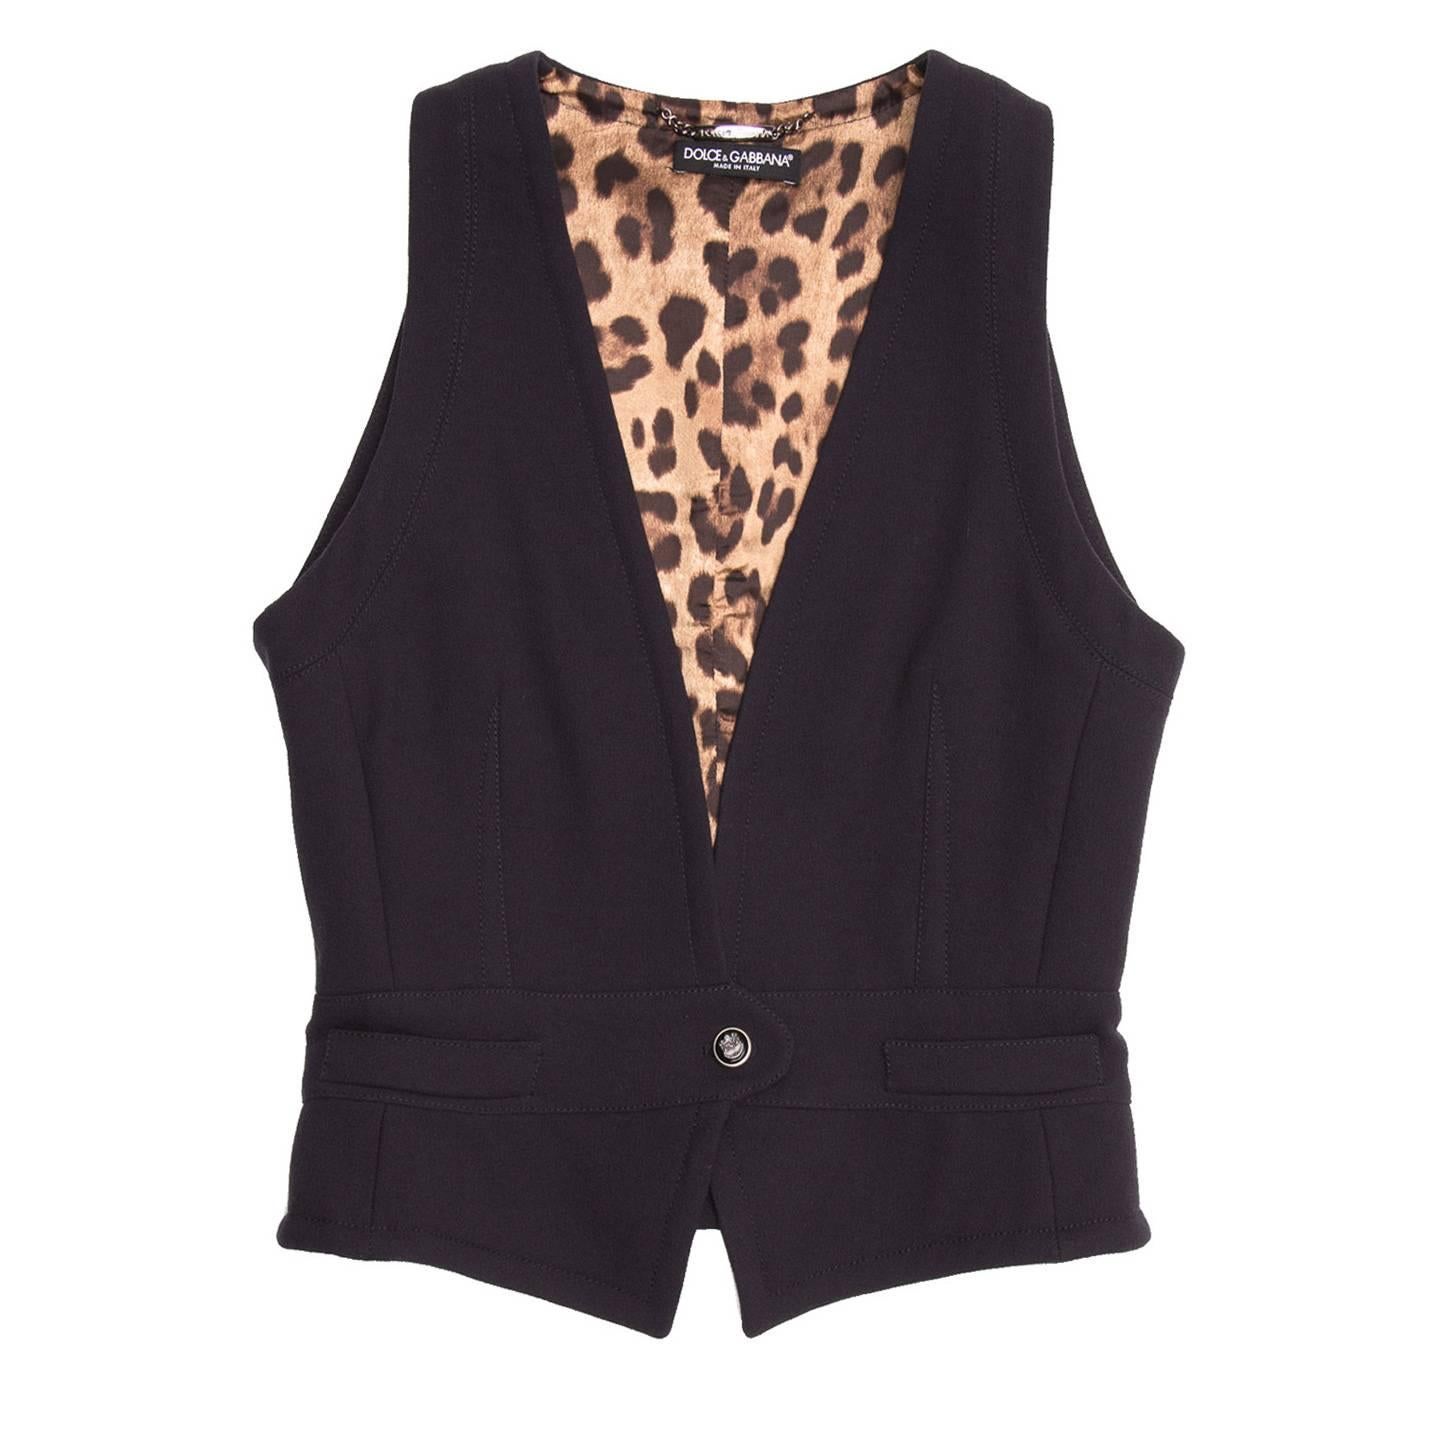 Fitted navy wool vest with single button closure. Darts at front and back for figure flattering fit. Single welt pockets at front waistband. Lining in signature leopard print.

Size  44 Italian sizing

Condition  Excellent: never worn